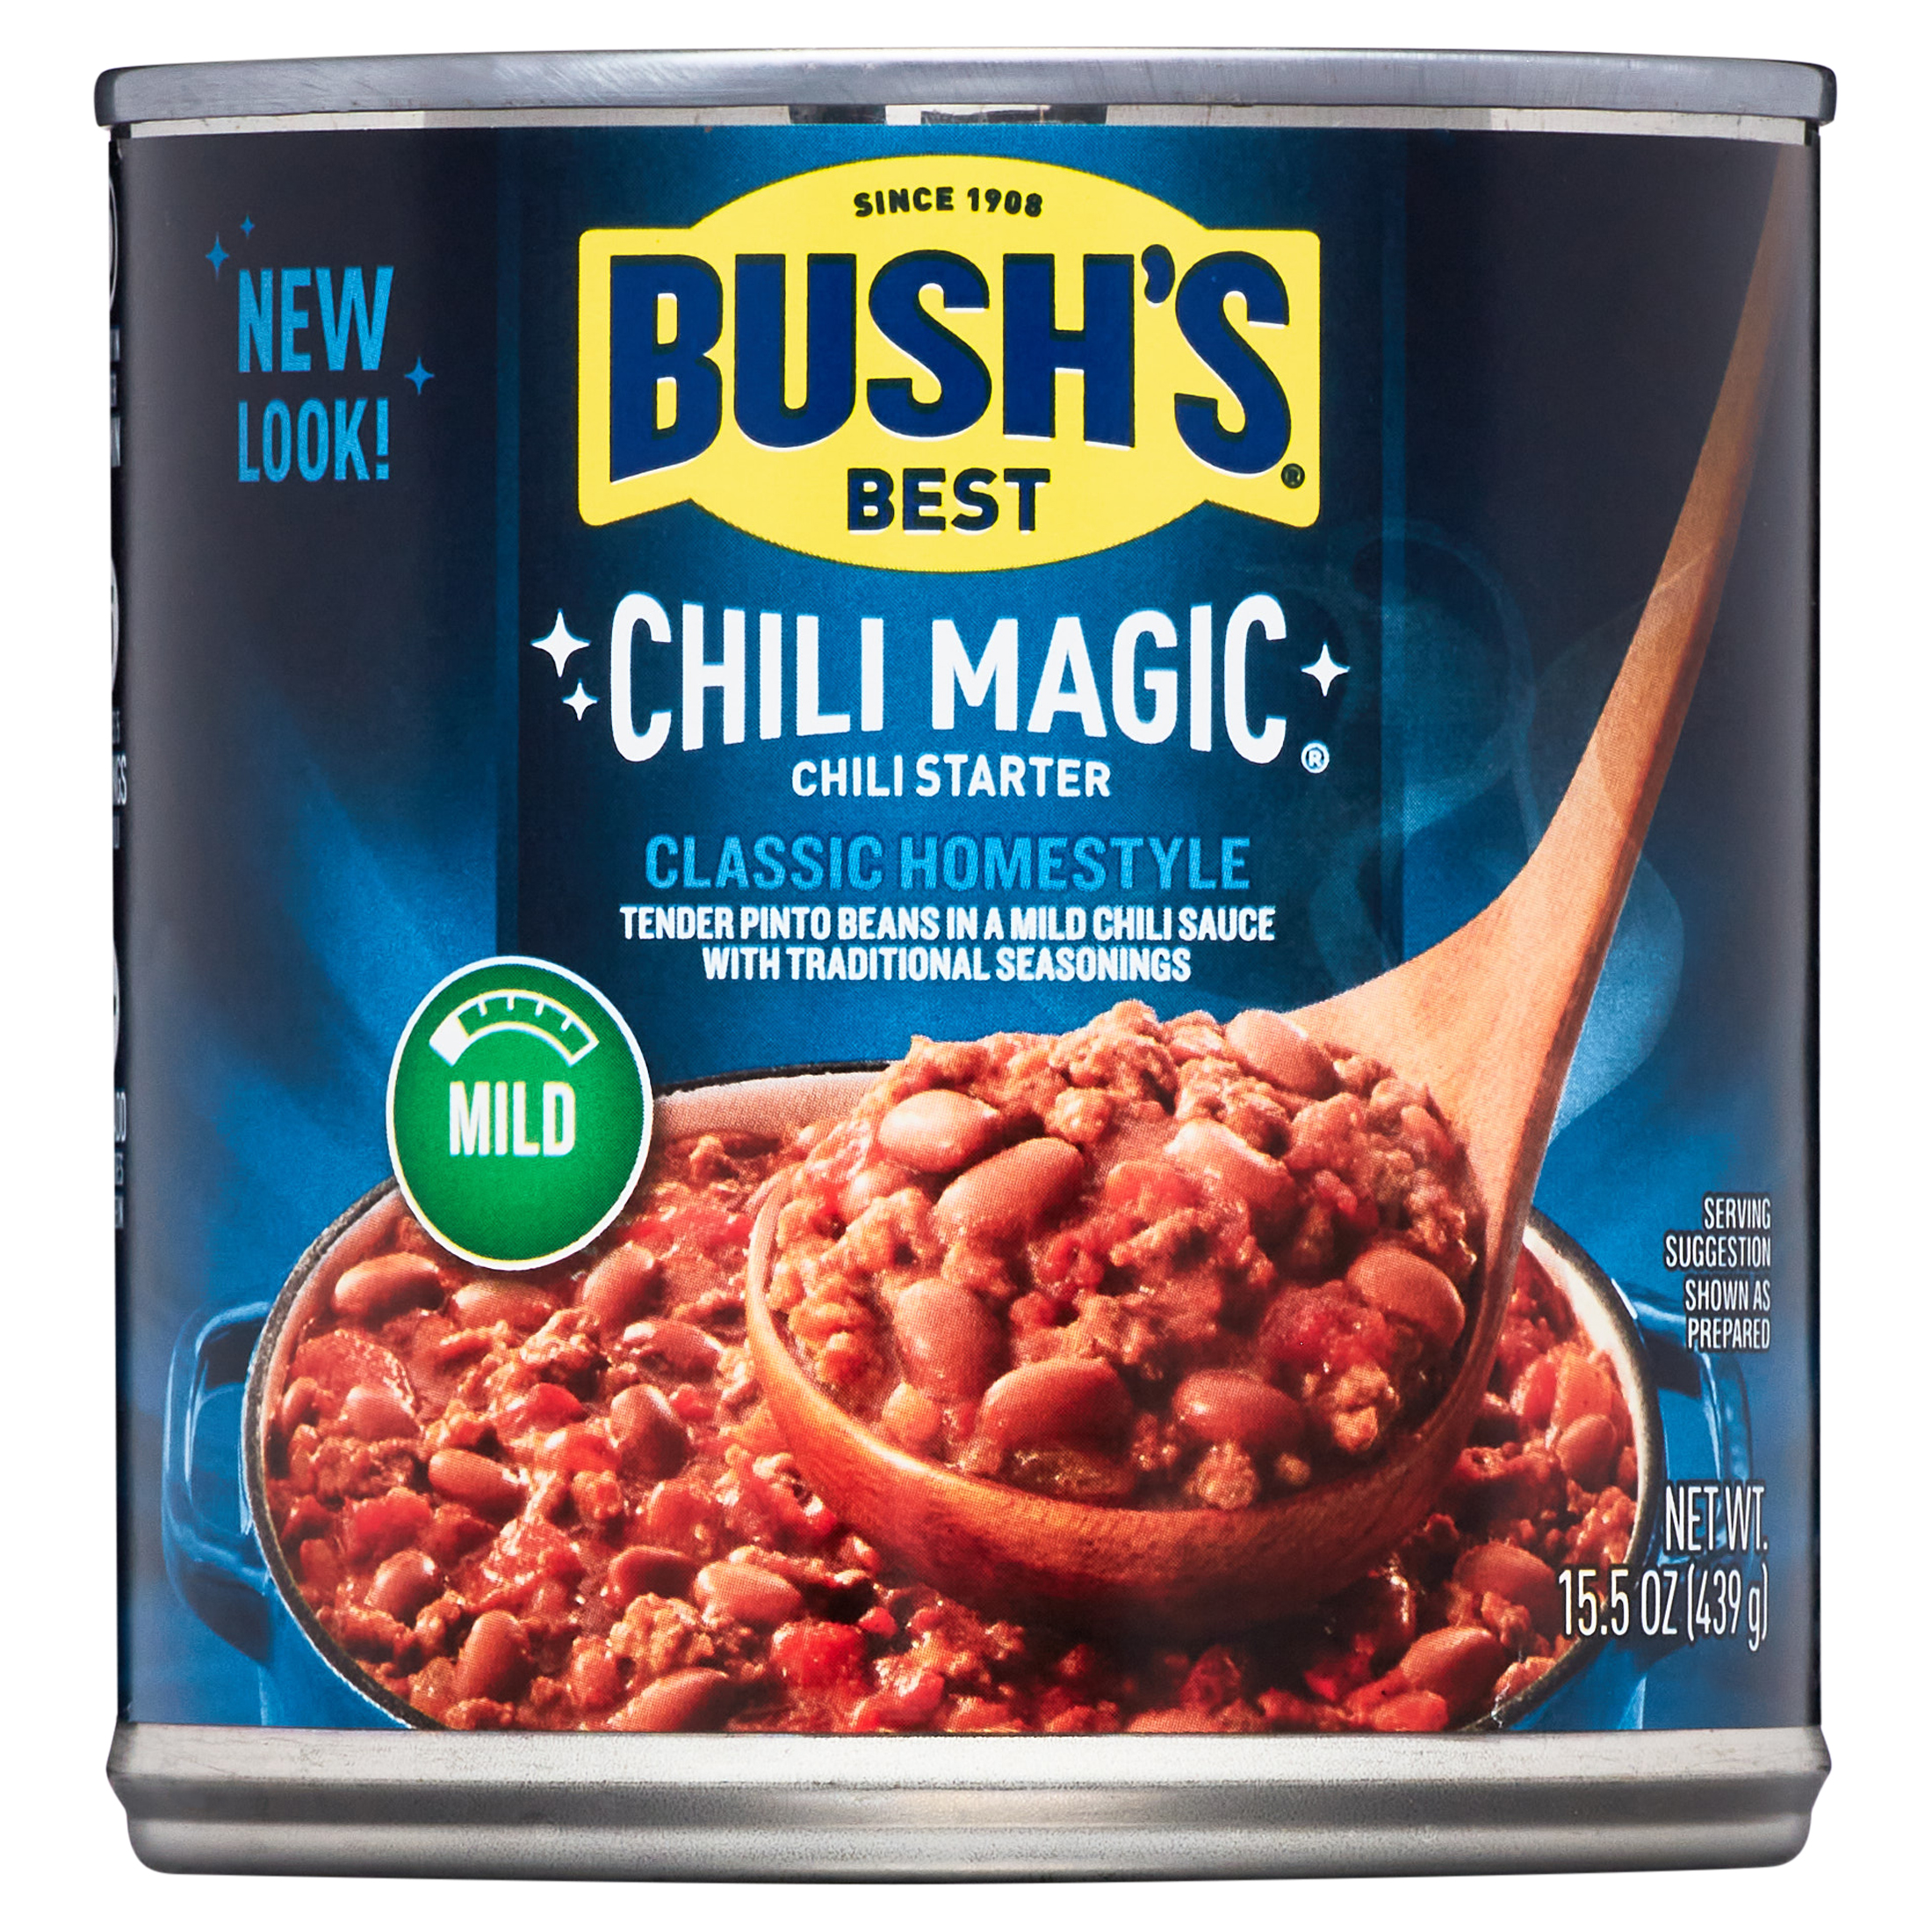 Bush's Classic Homestyle Chili Magic, Canned Beans, 15.5 oz Can - image 1 of 10